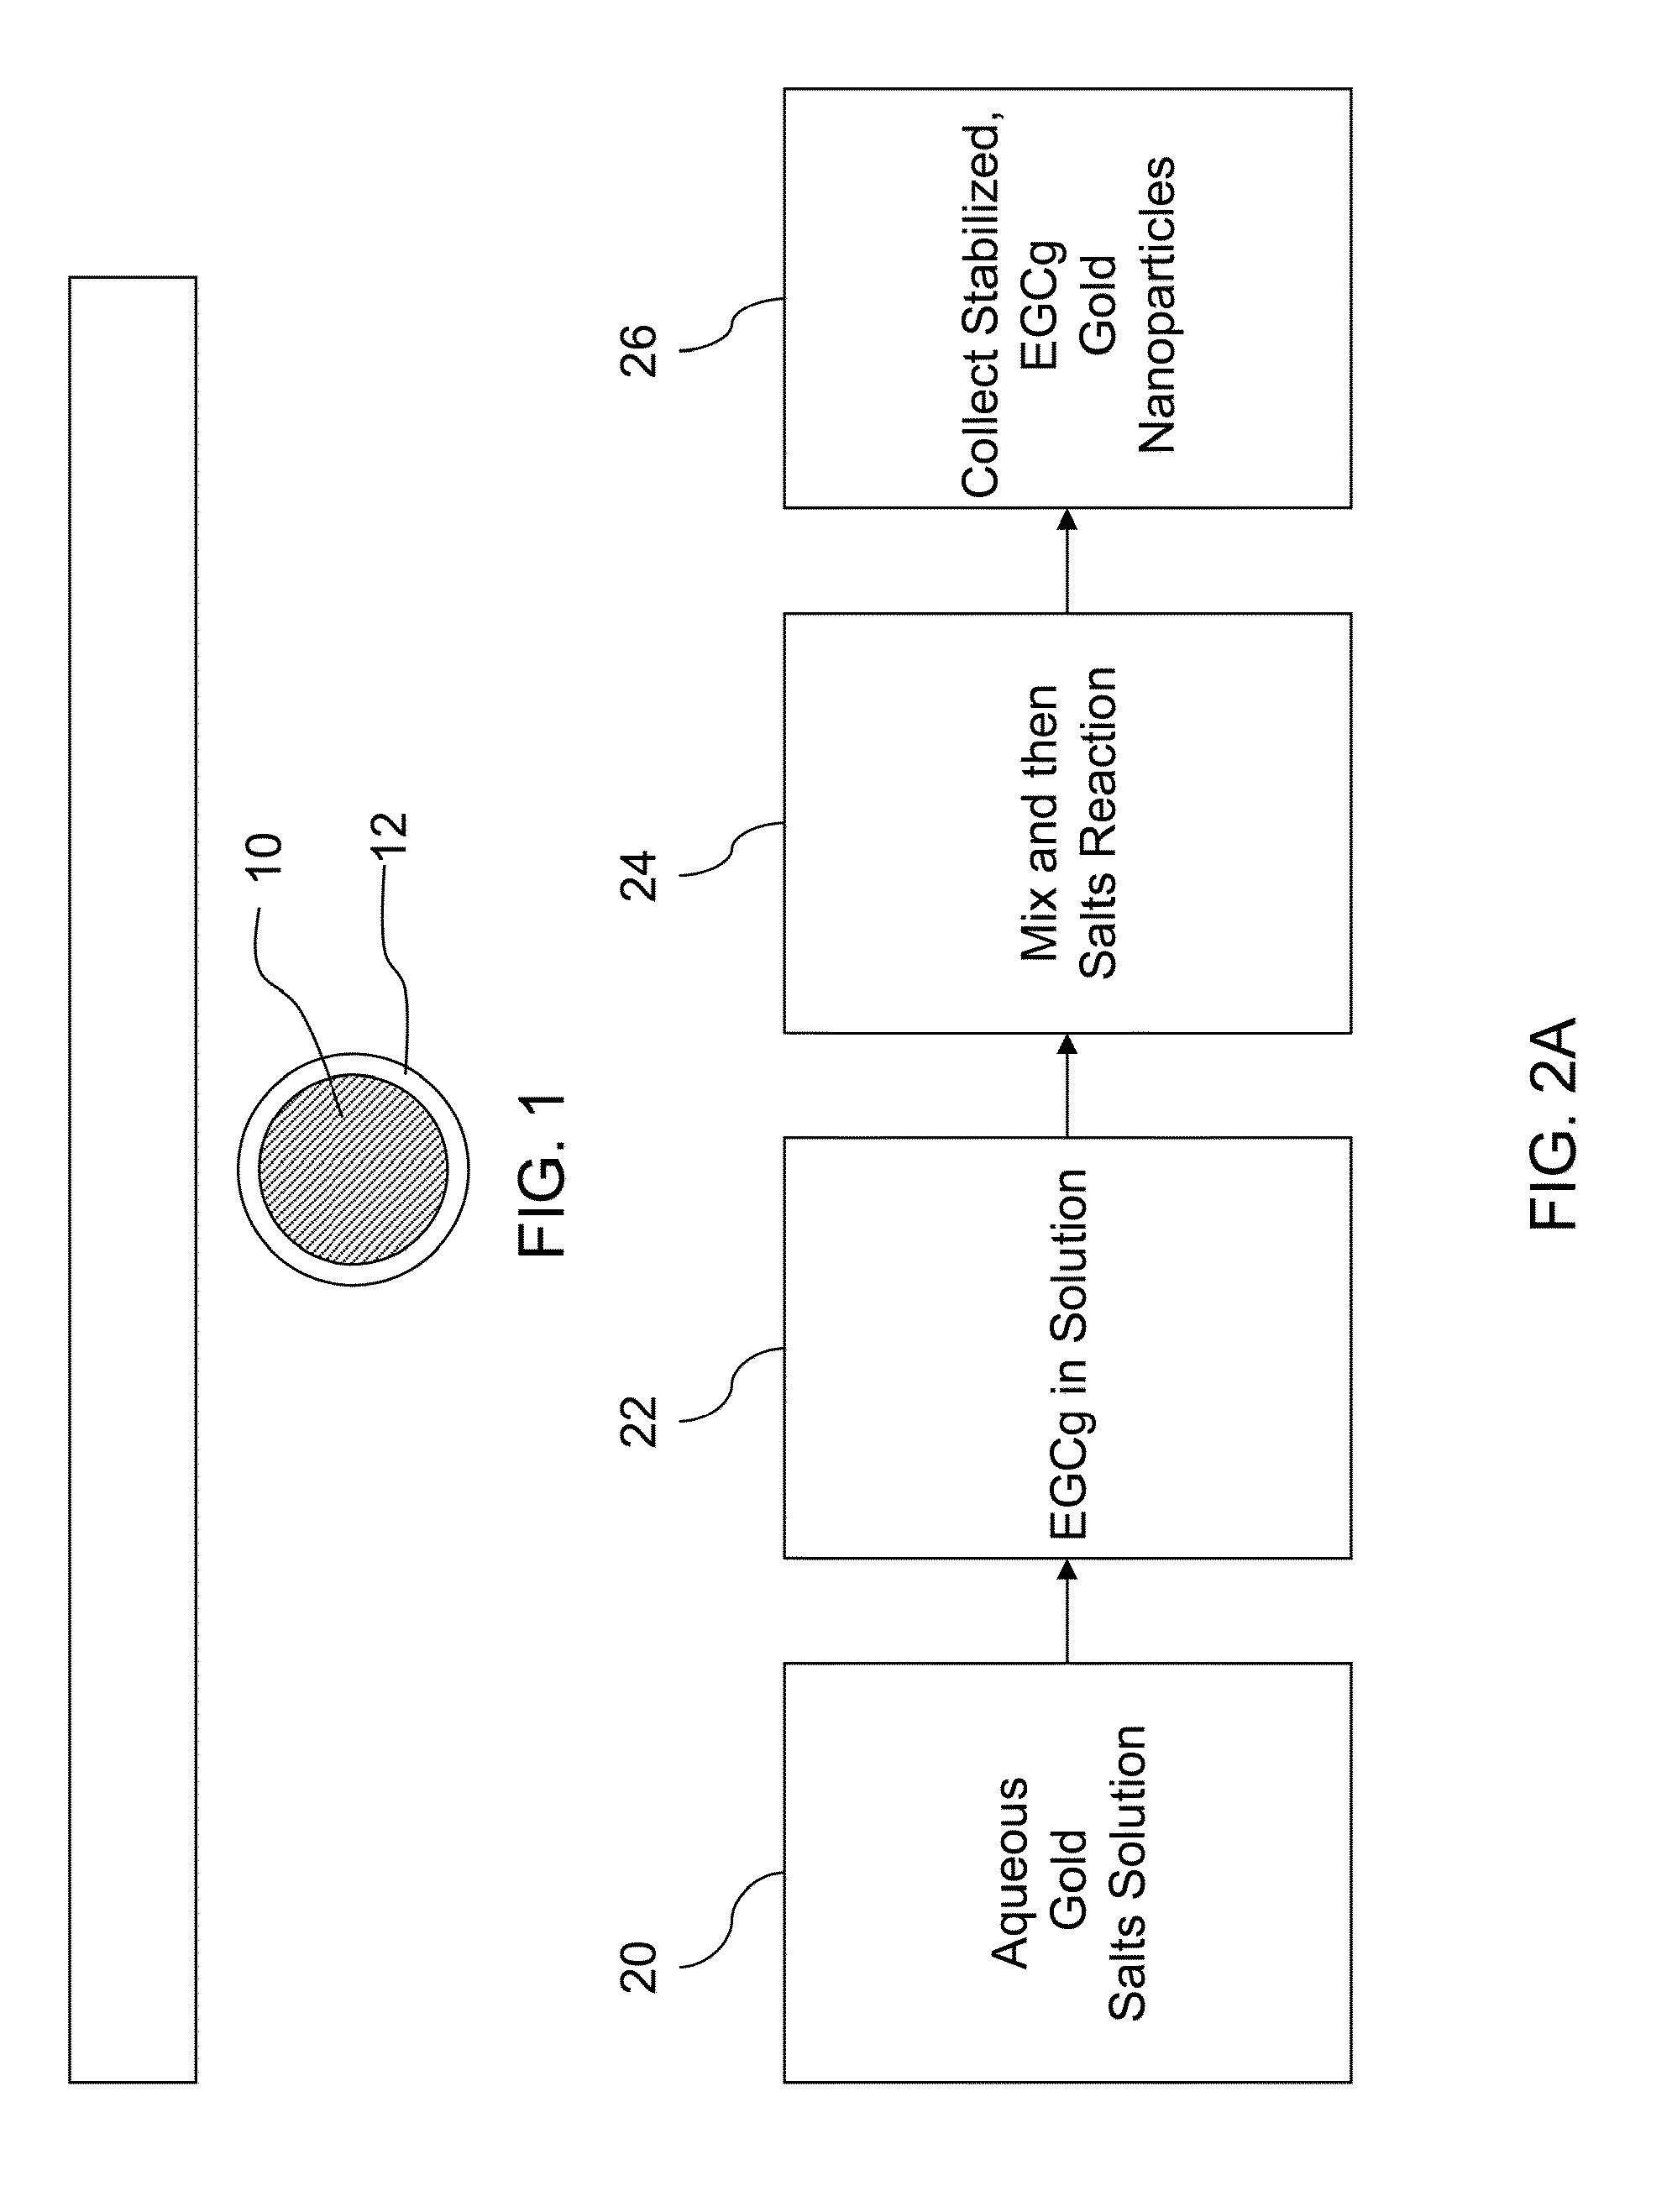 Egcg stabilized gold nanoparticles and method for making same